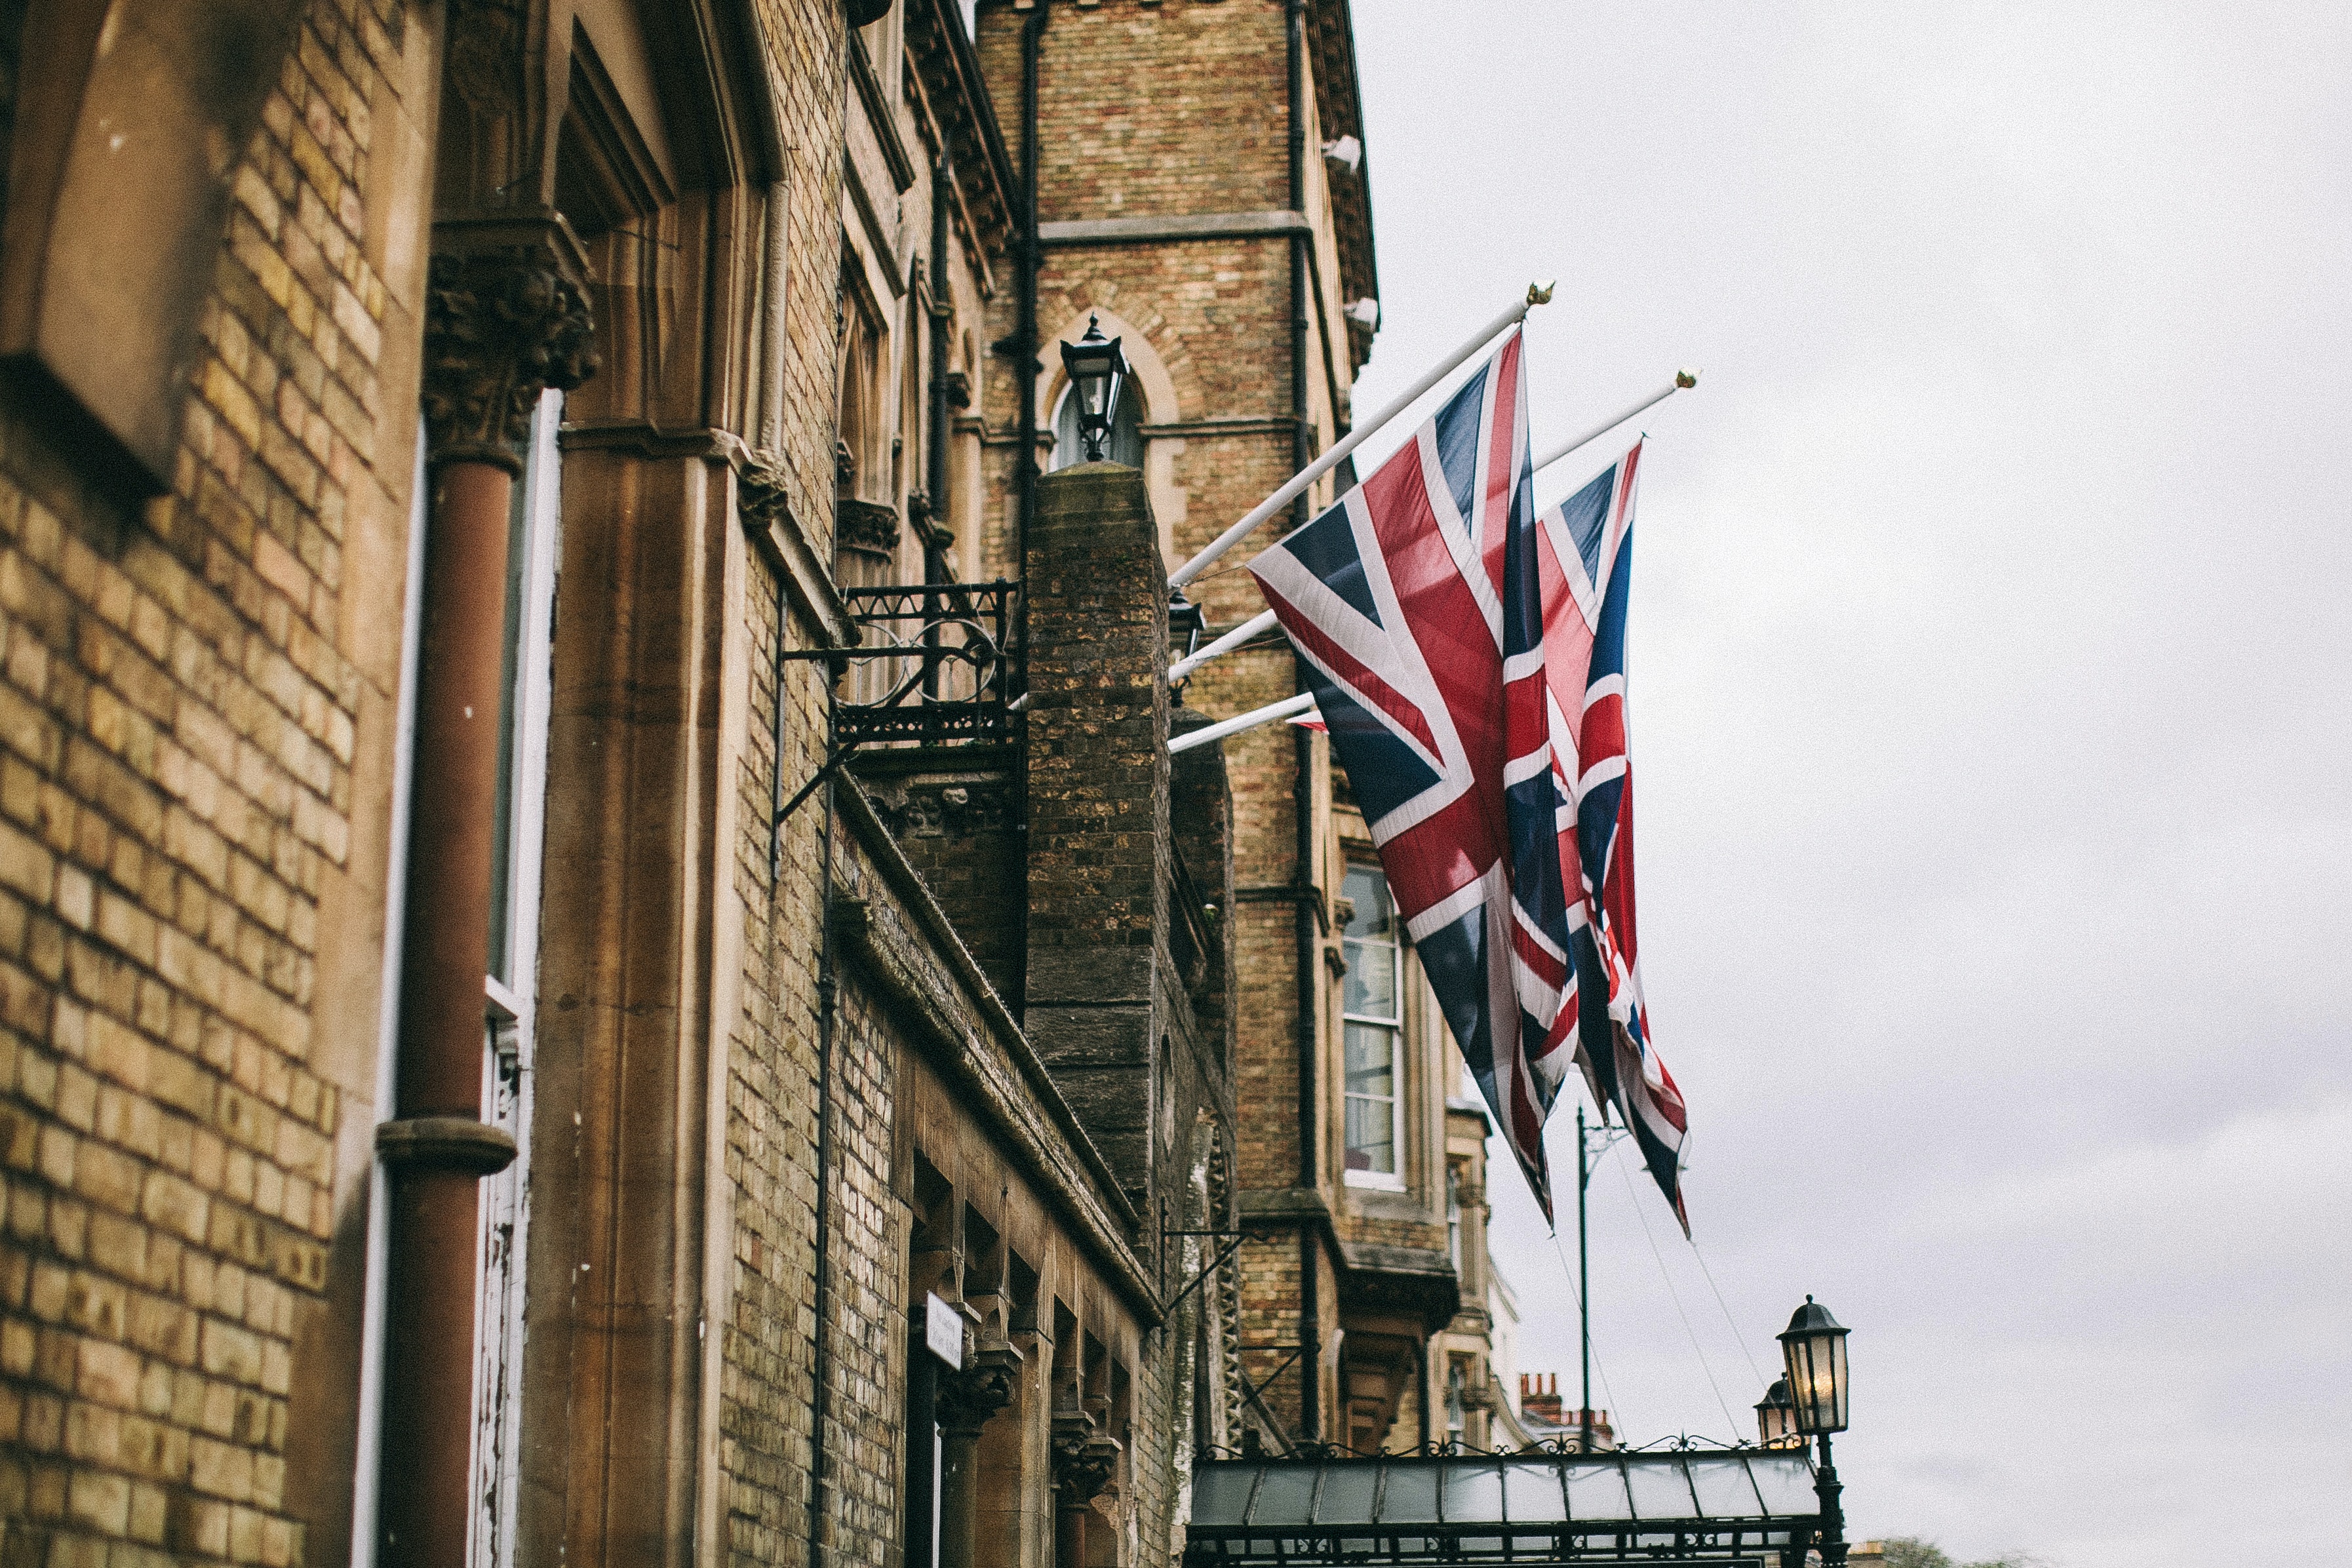 A British flag hangs on a building in London